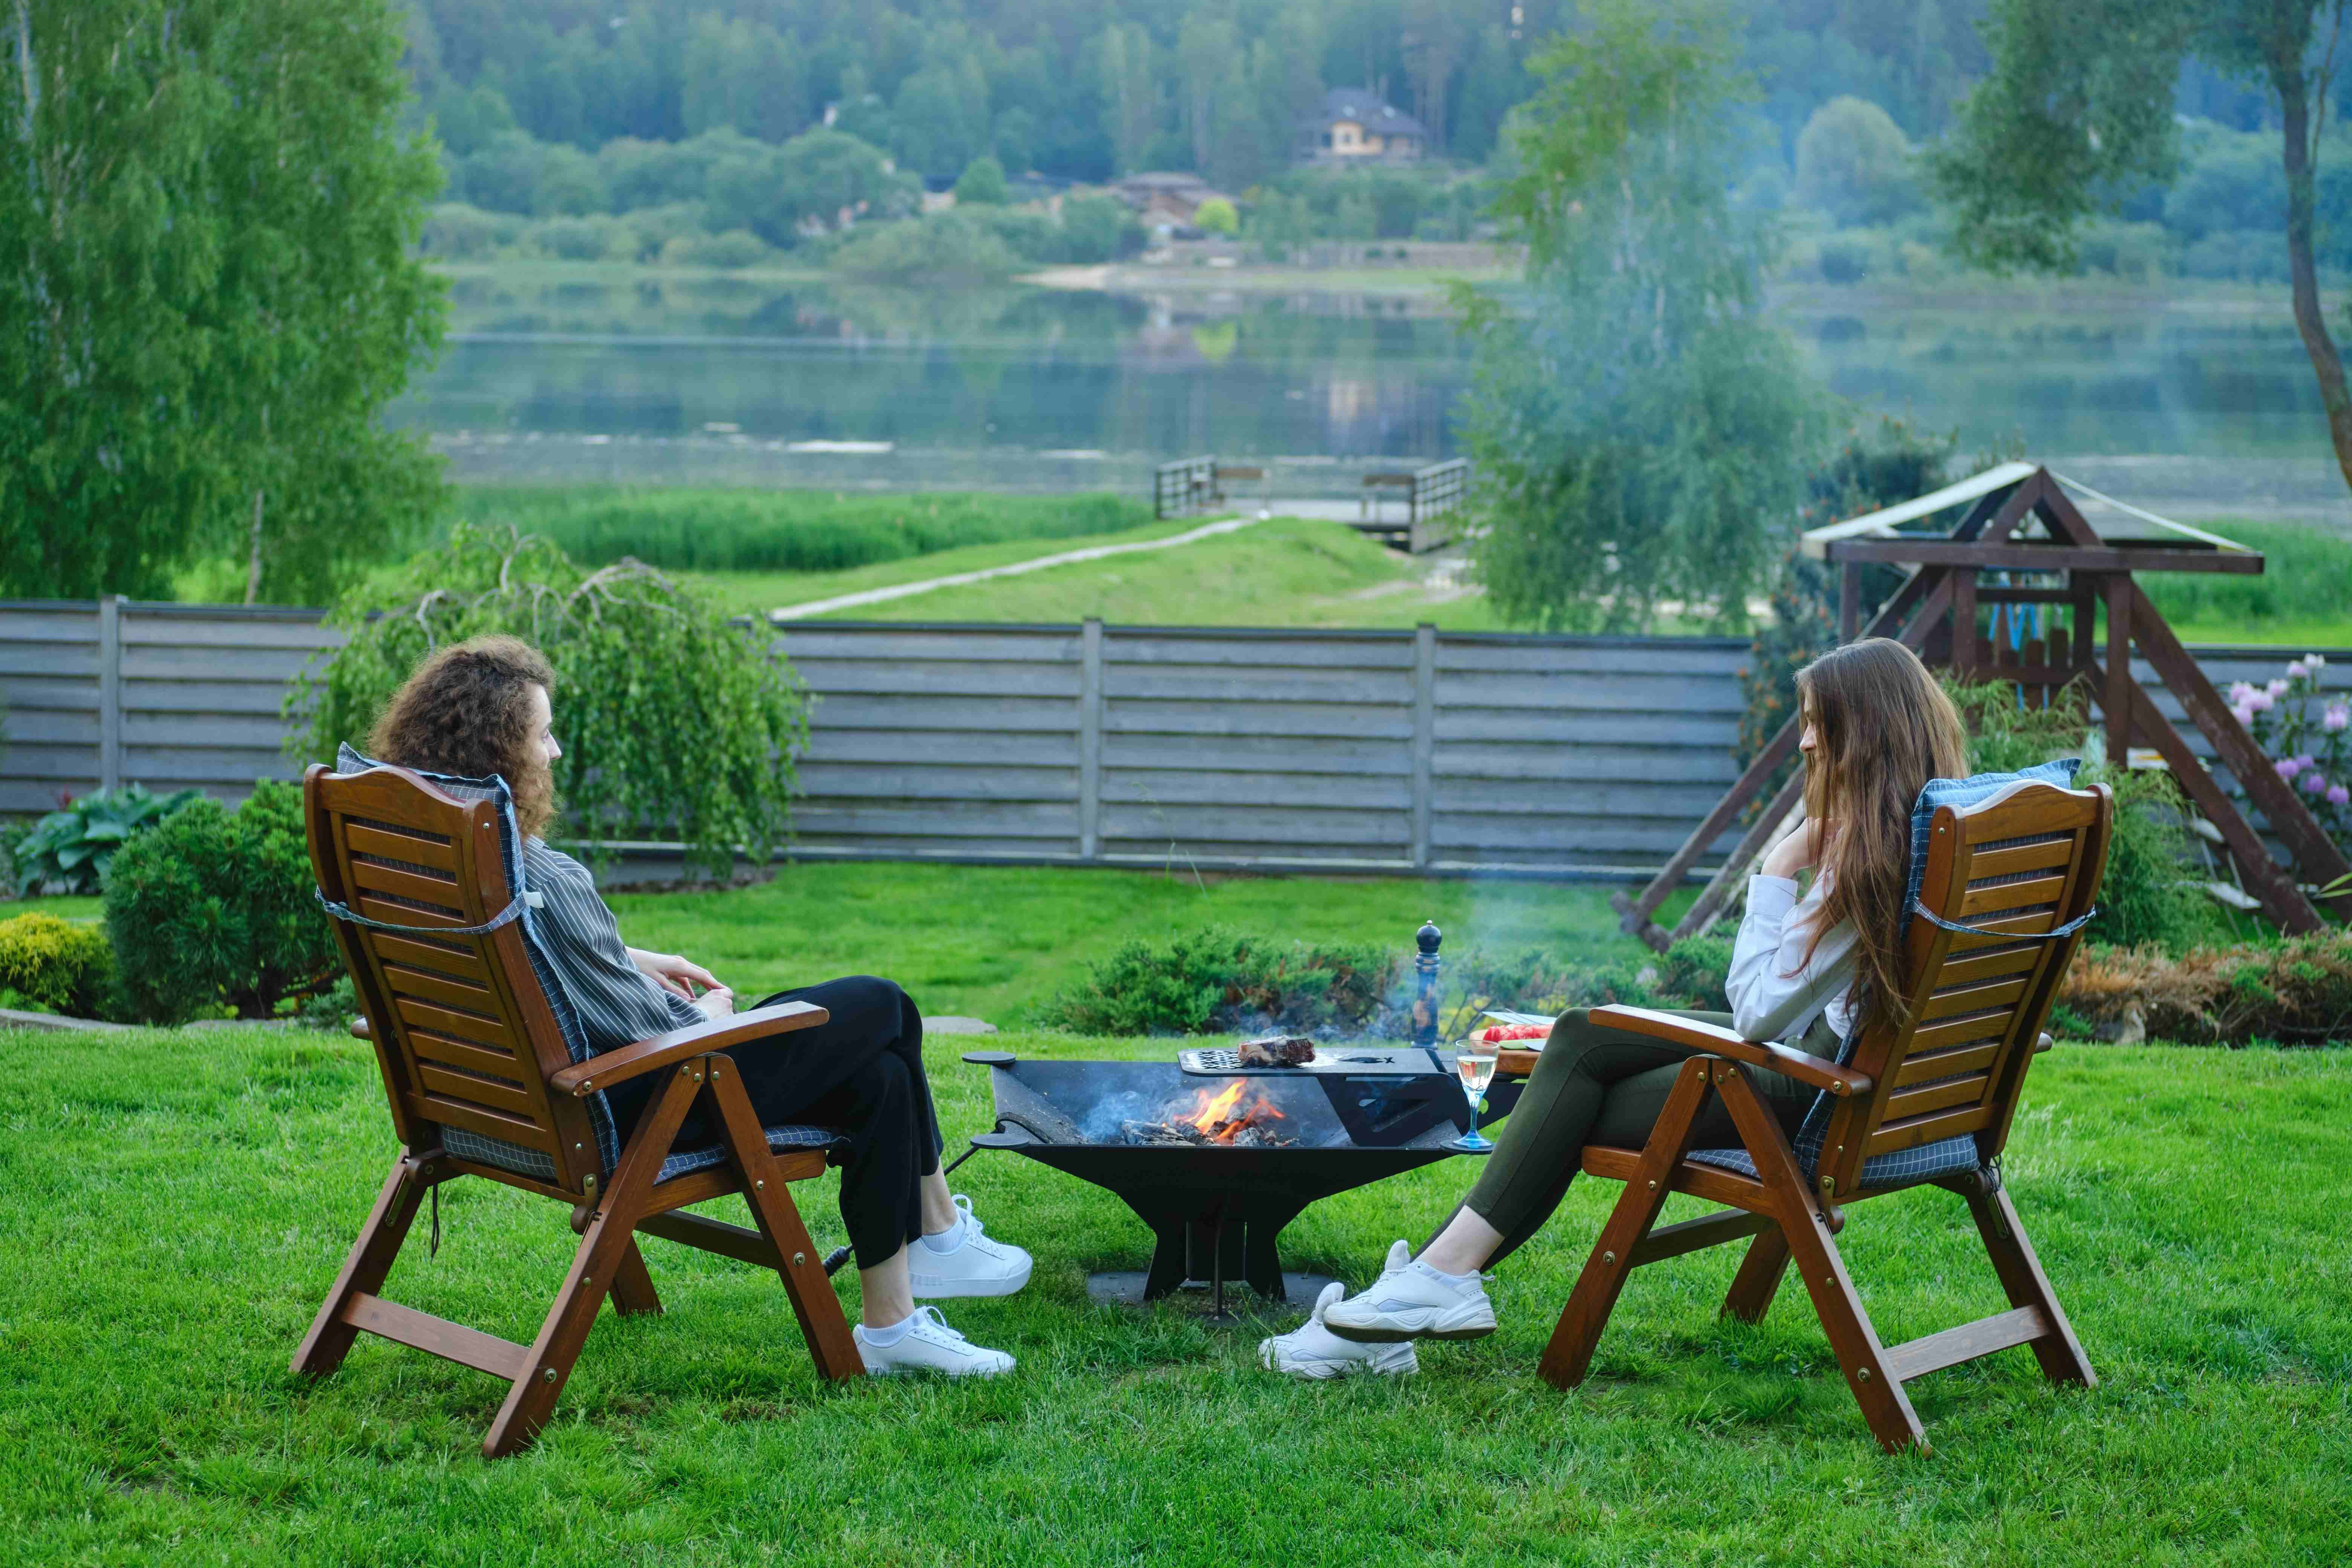 Two friends gathered around a fire pit in the backyard during a summer barbecue